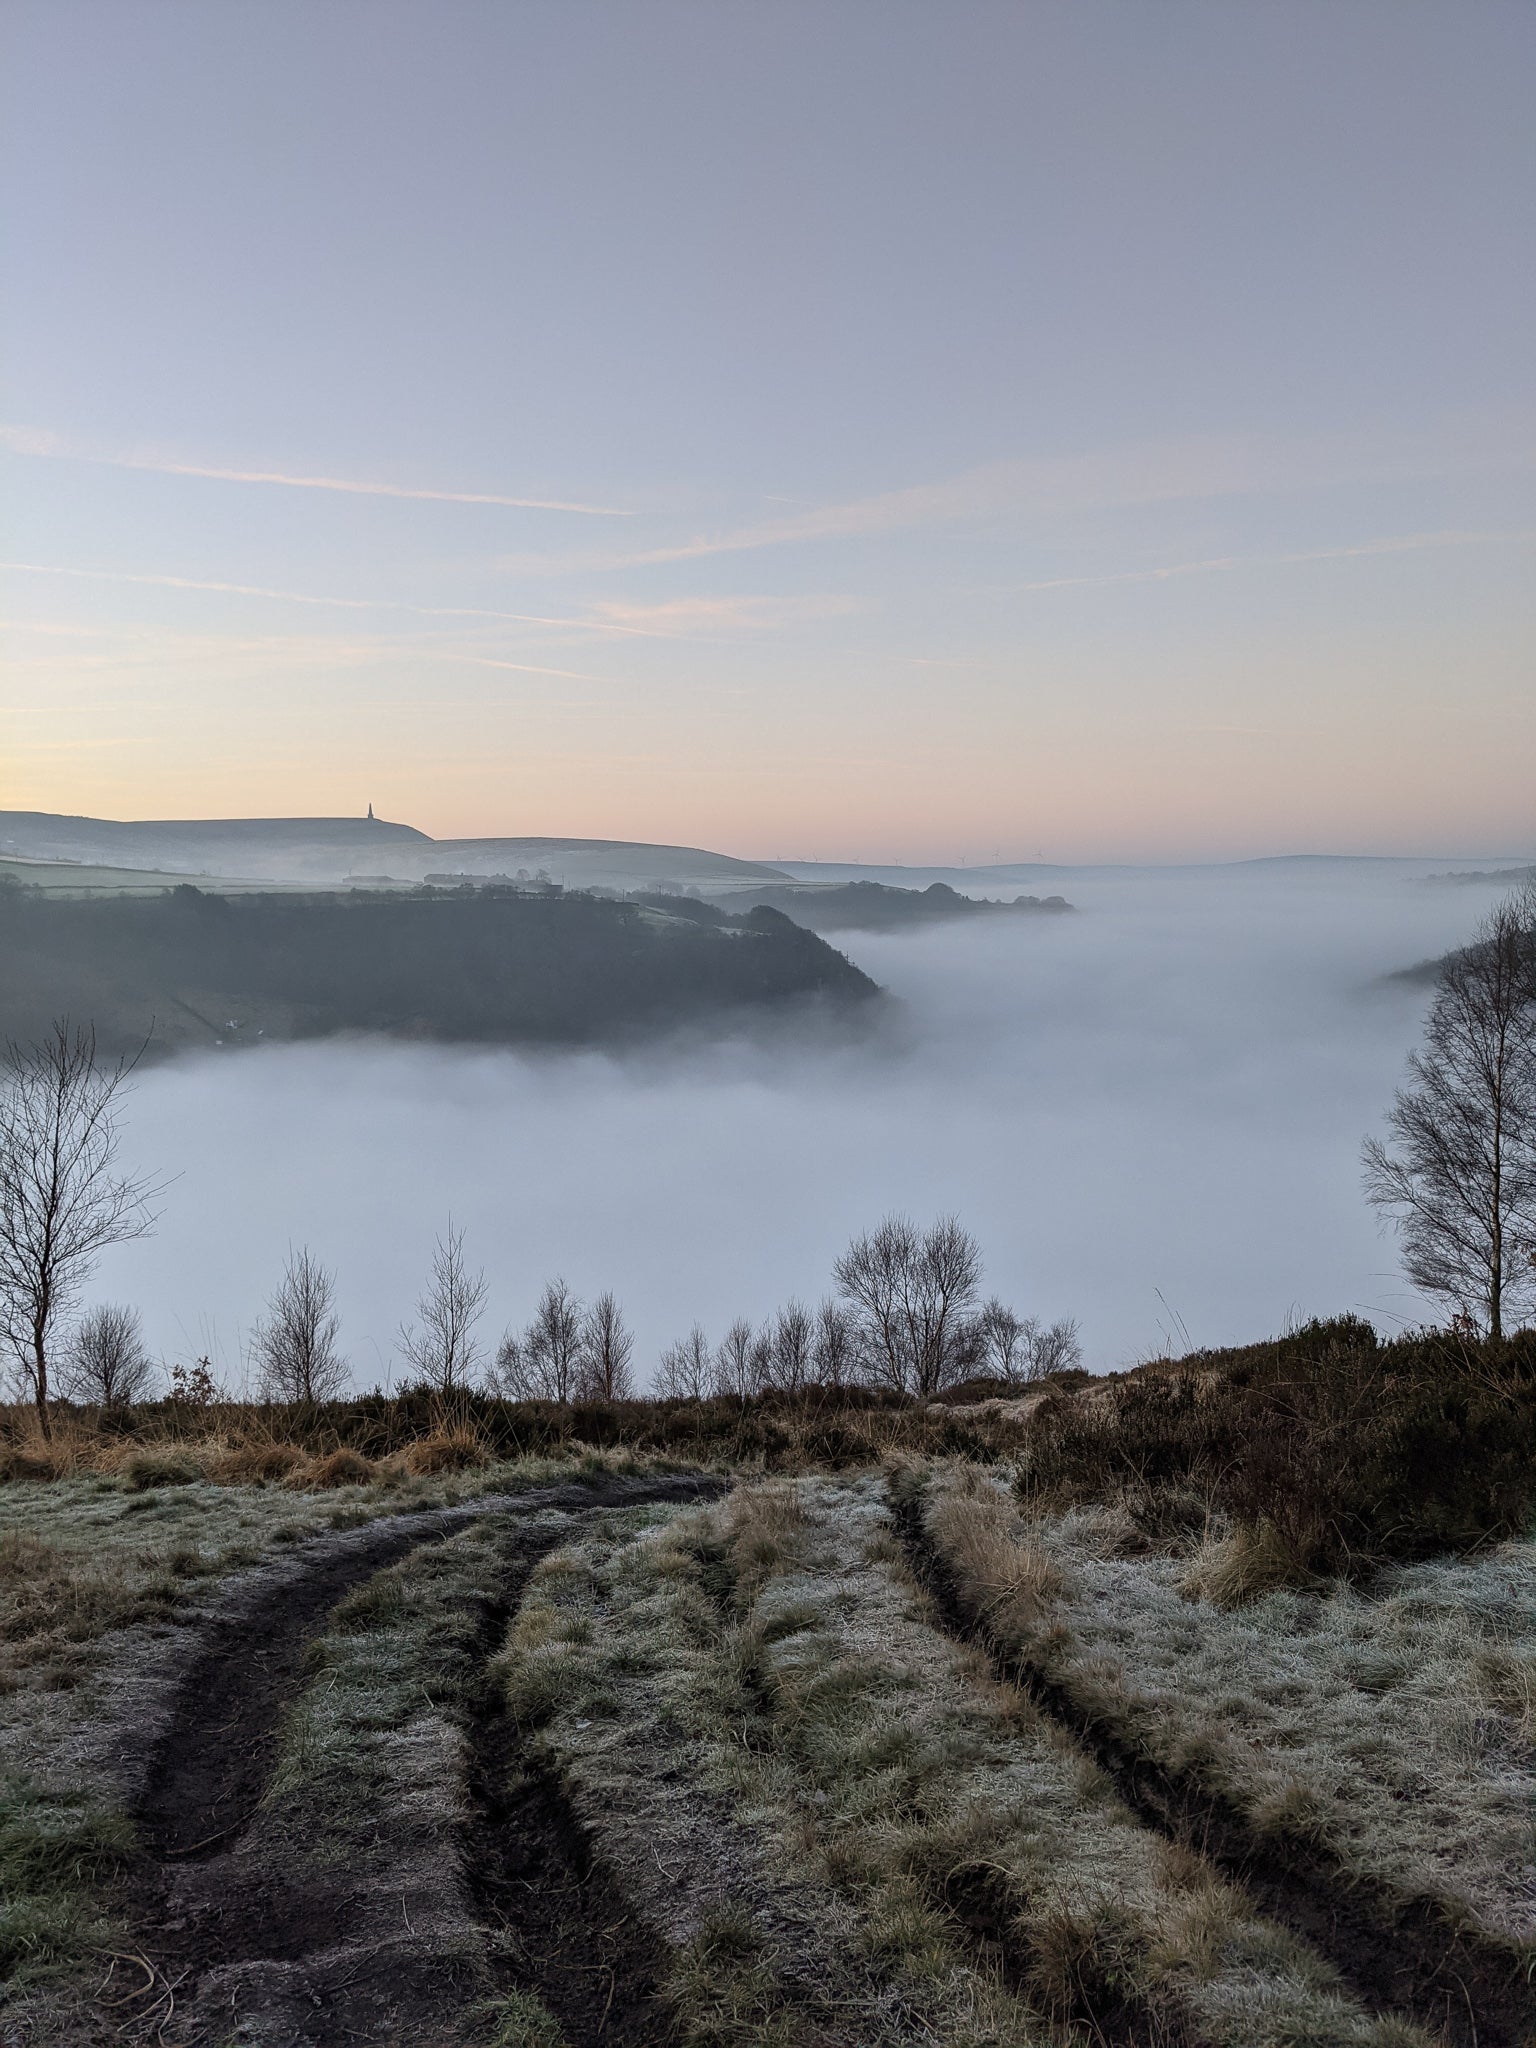 cloud inversion in the Calder Valley